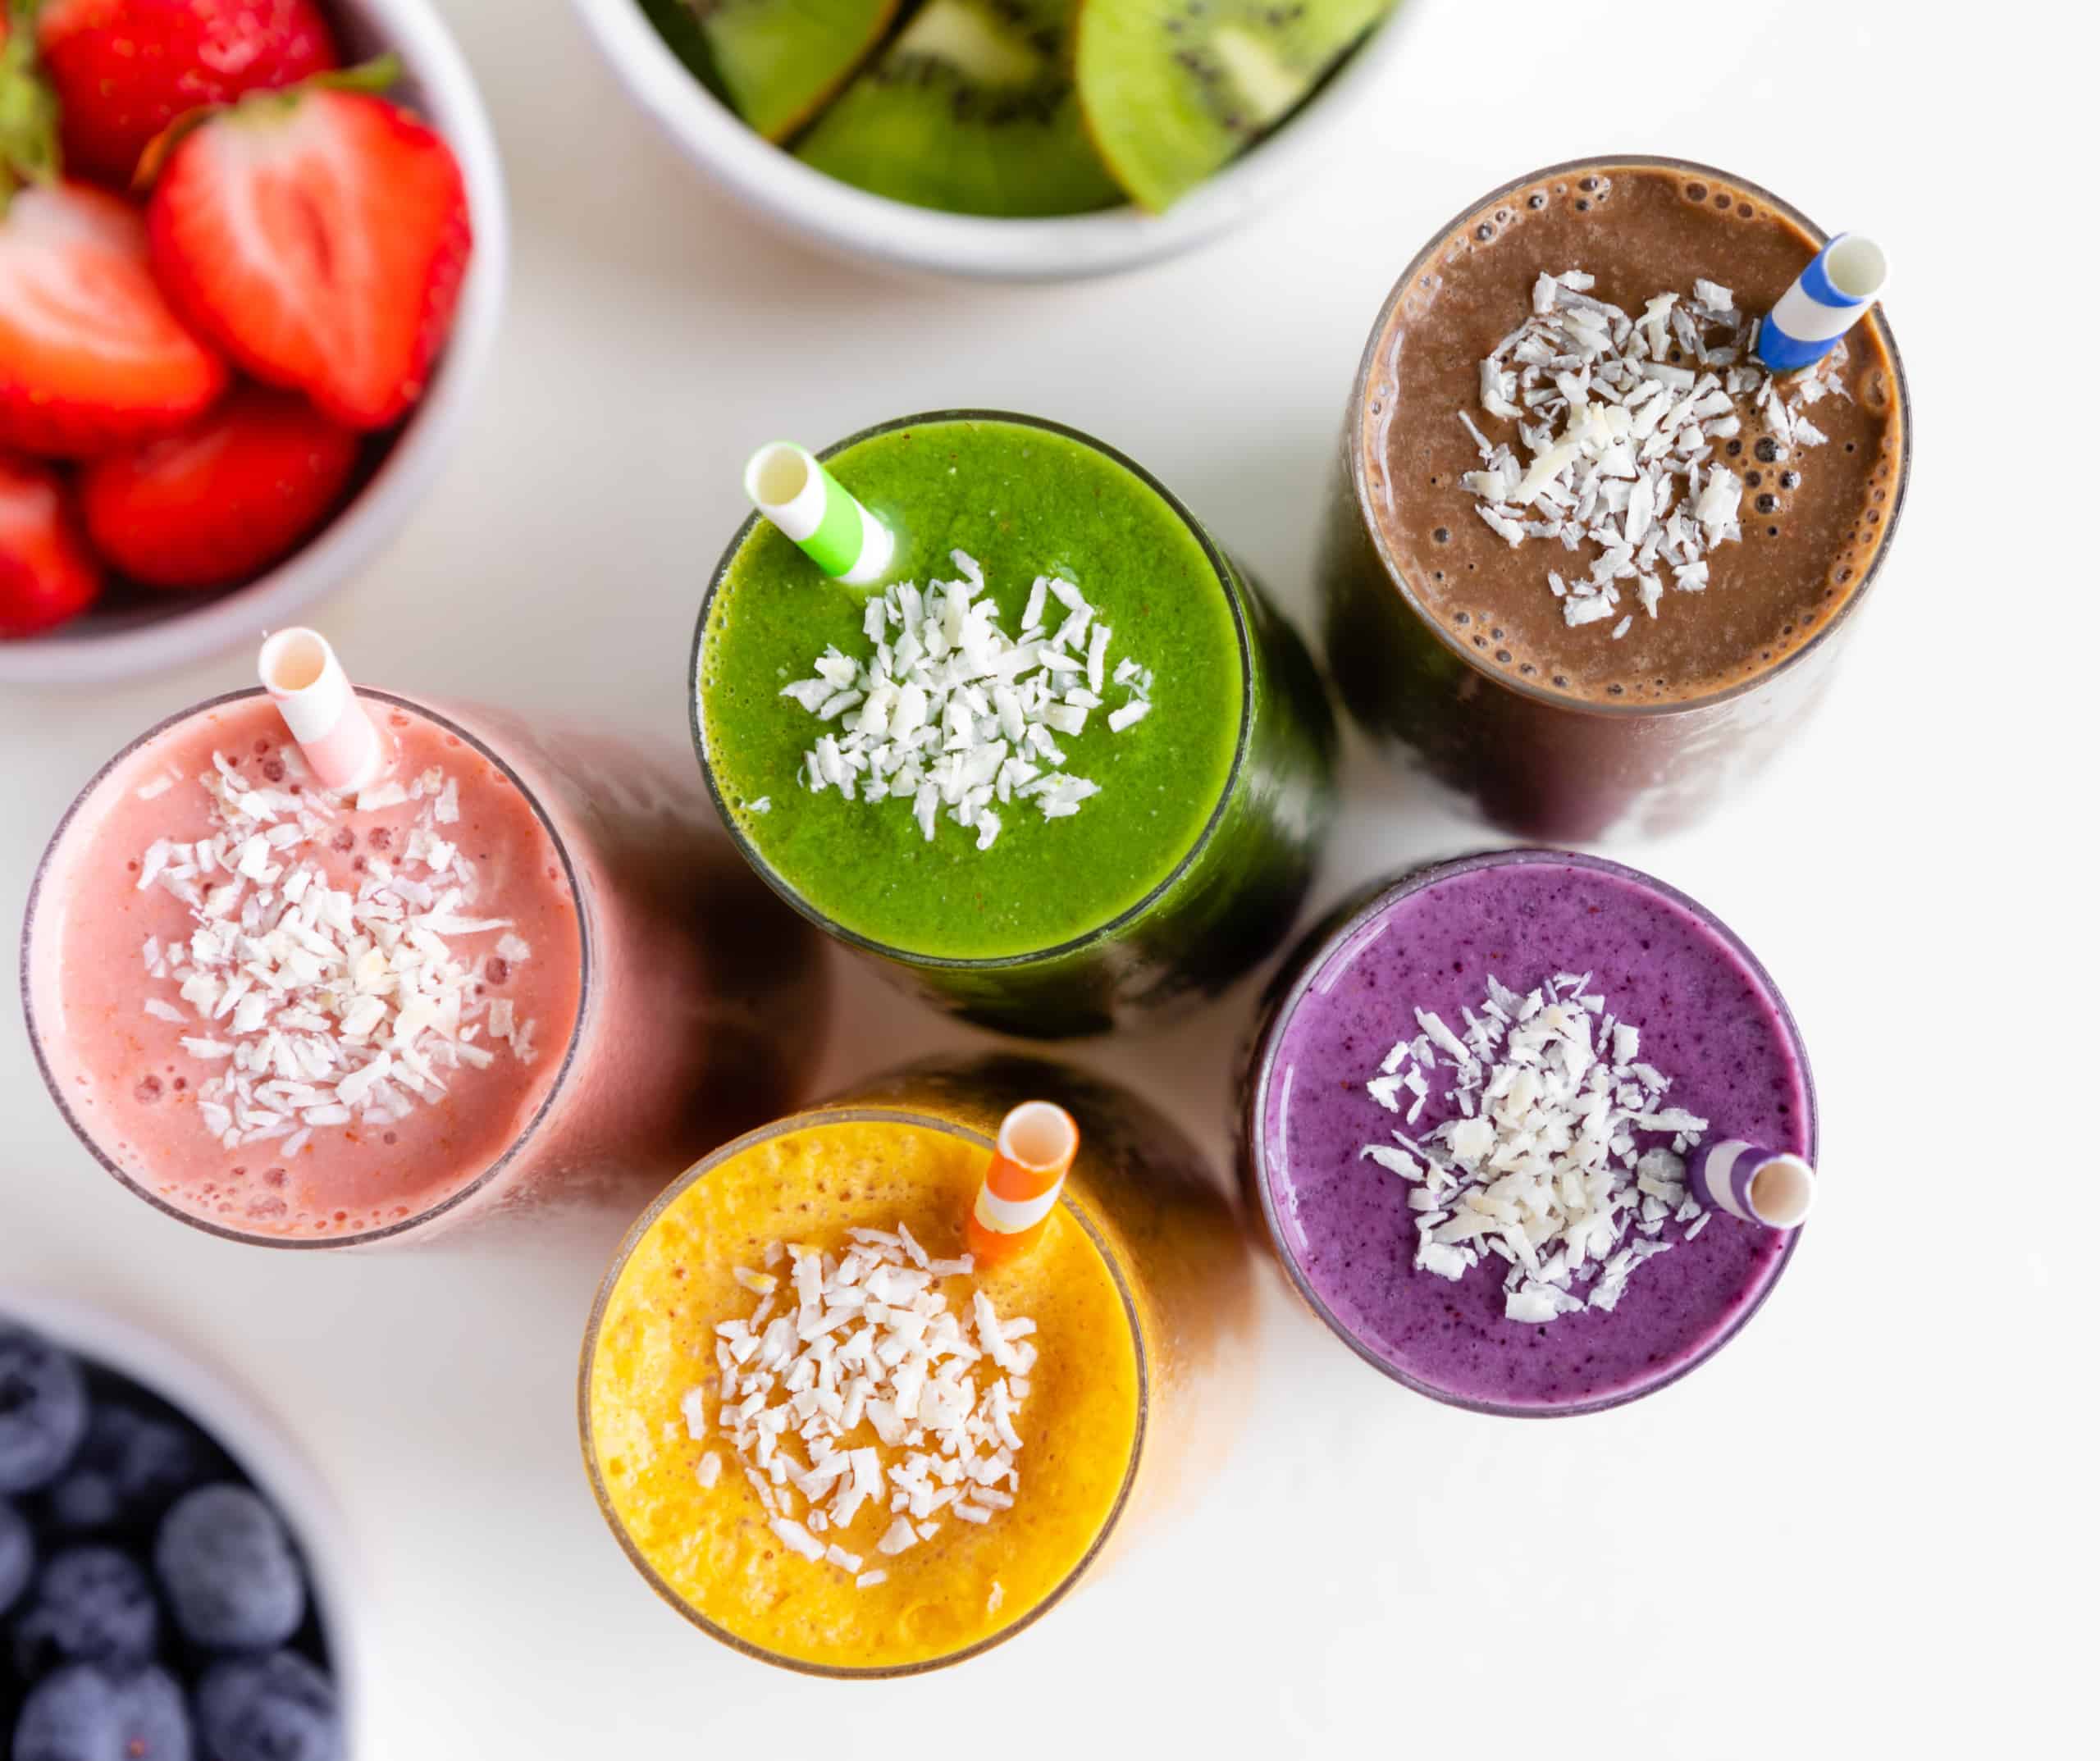 All five smoothie flavors available with SmoothieBox